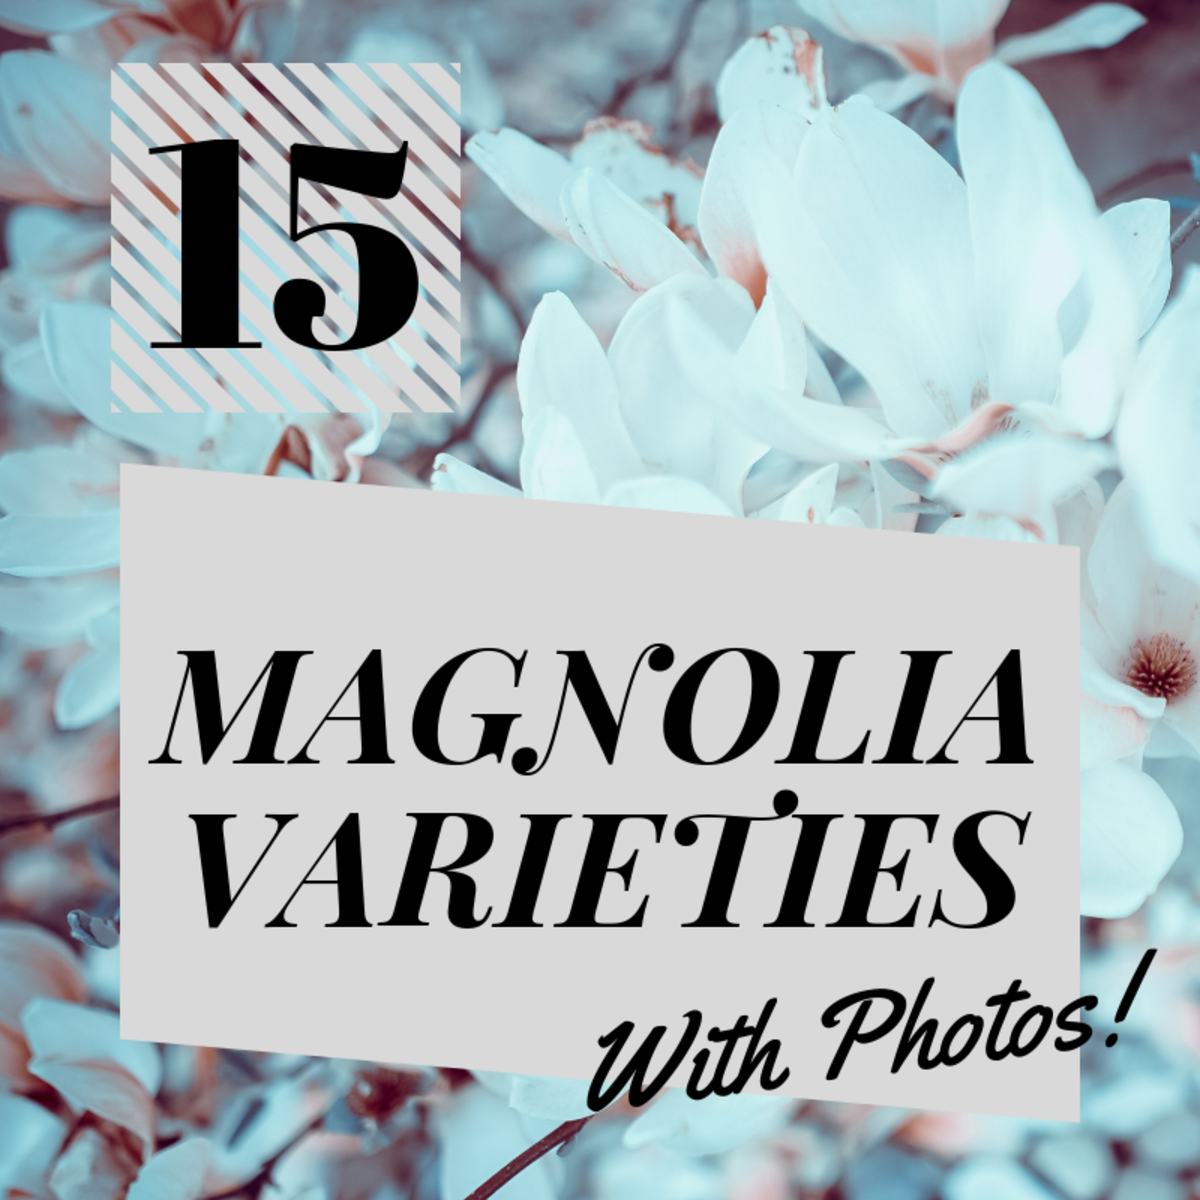 I spotted each of these 15 magnolia varieties in my home state of Ohio. 